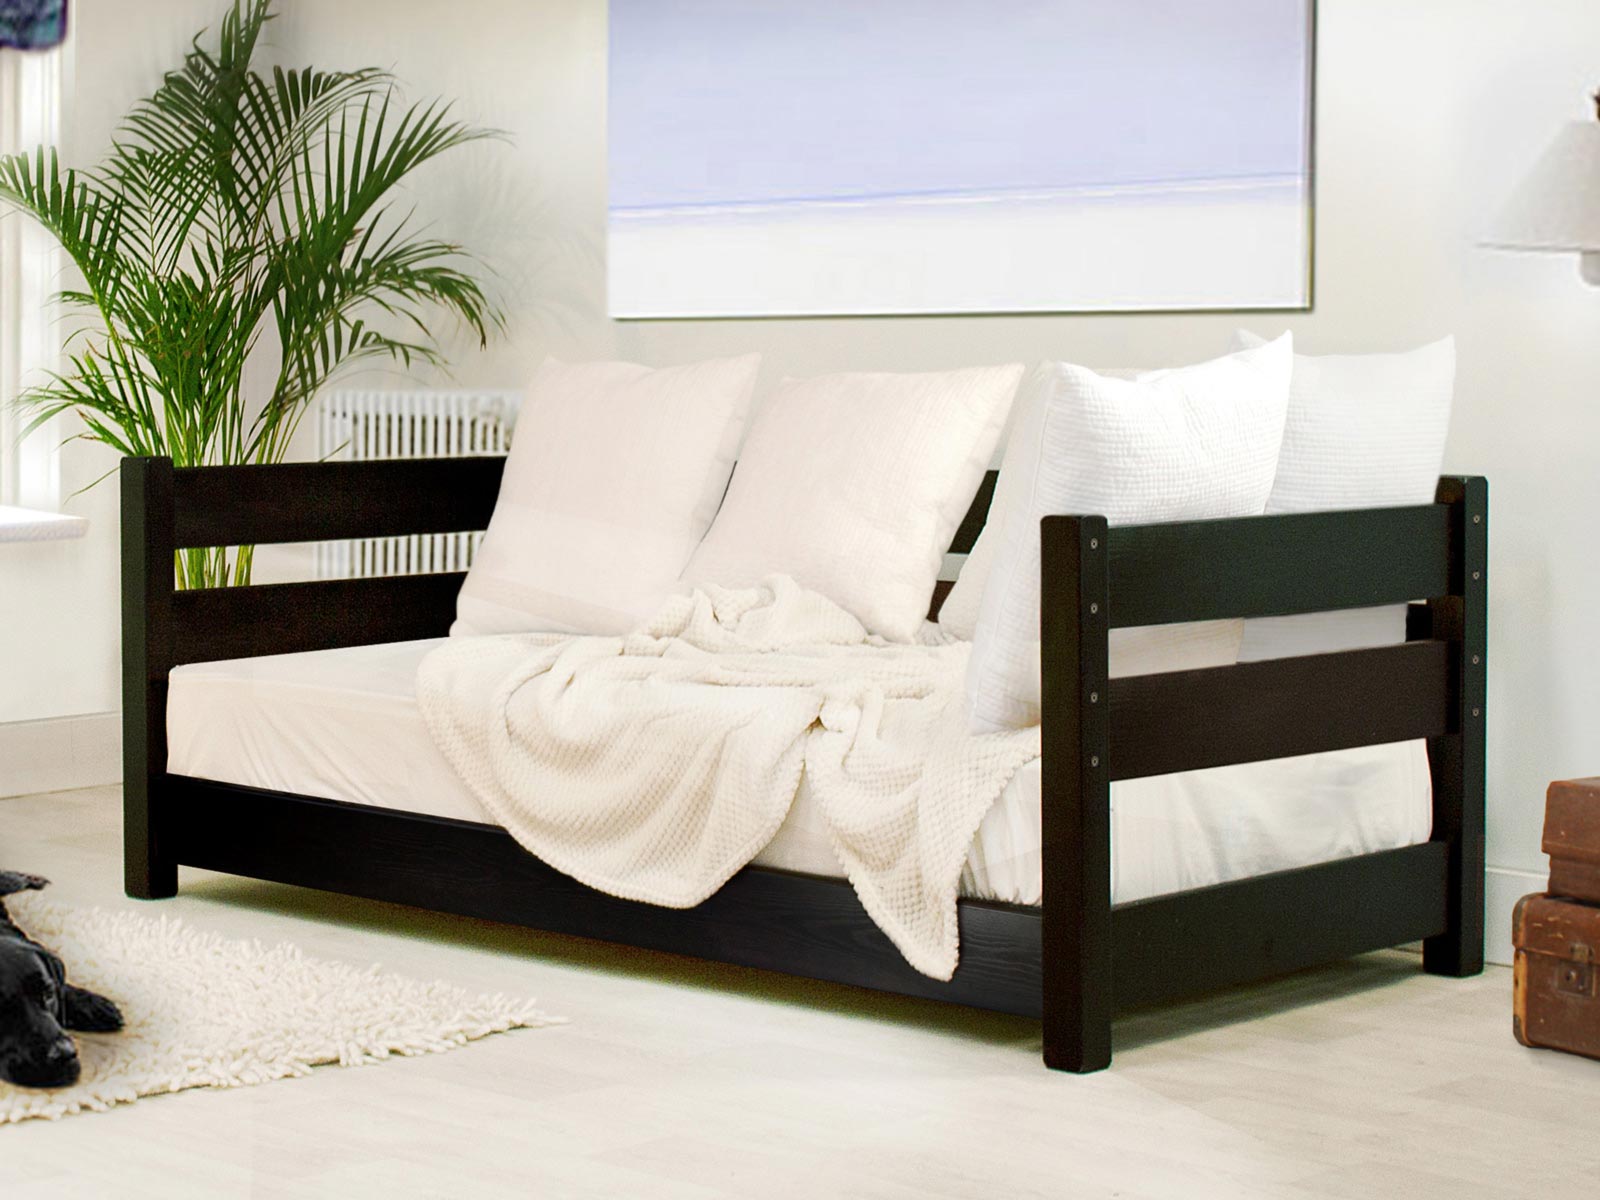 wooden day bed sofa